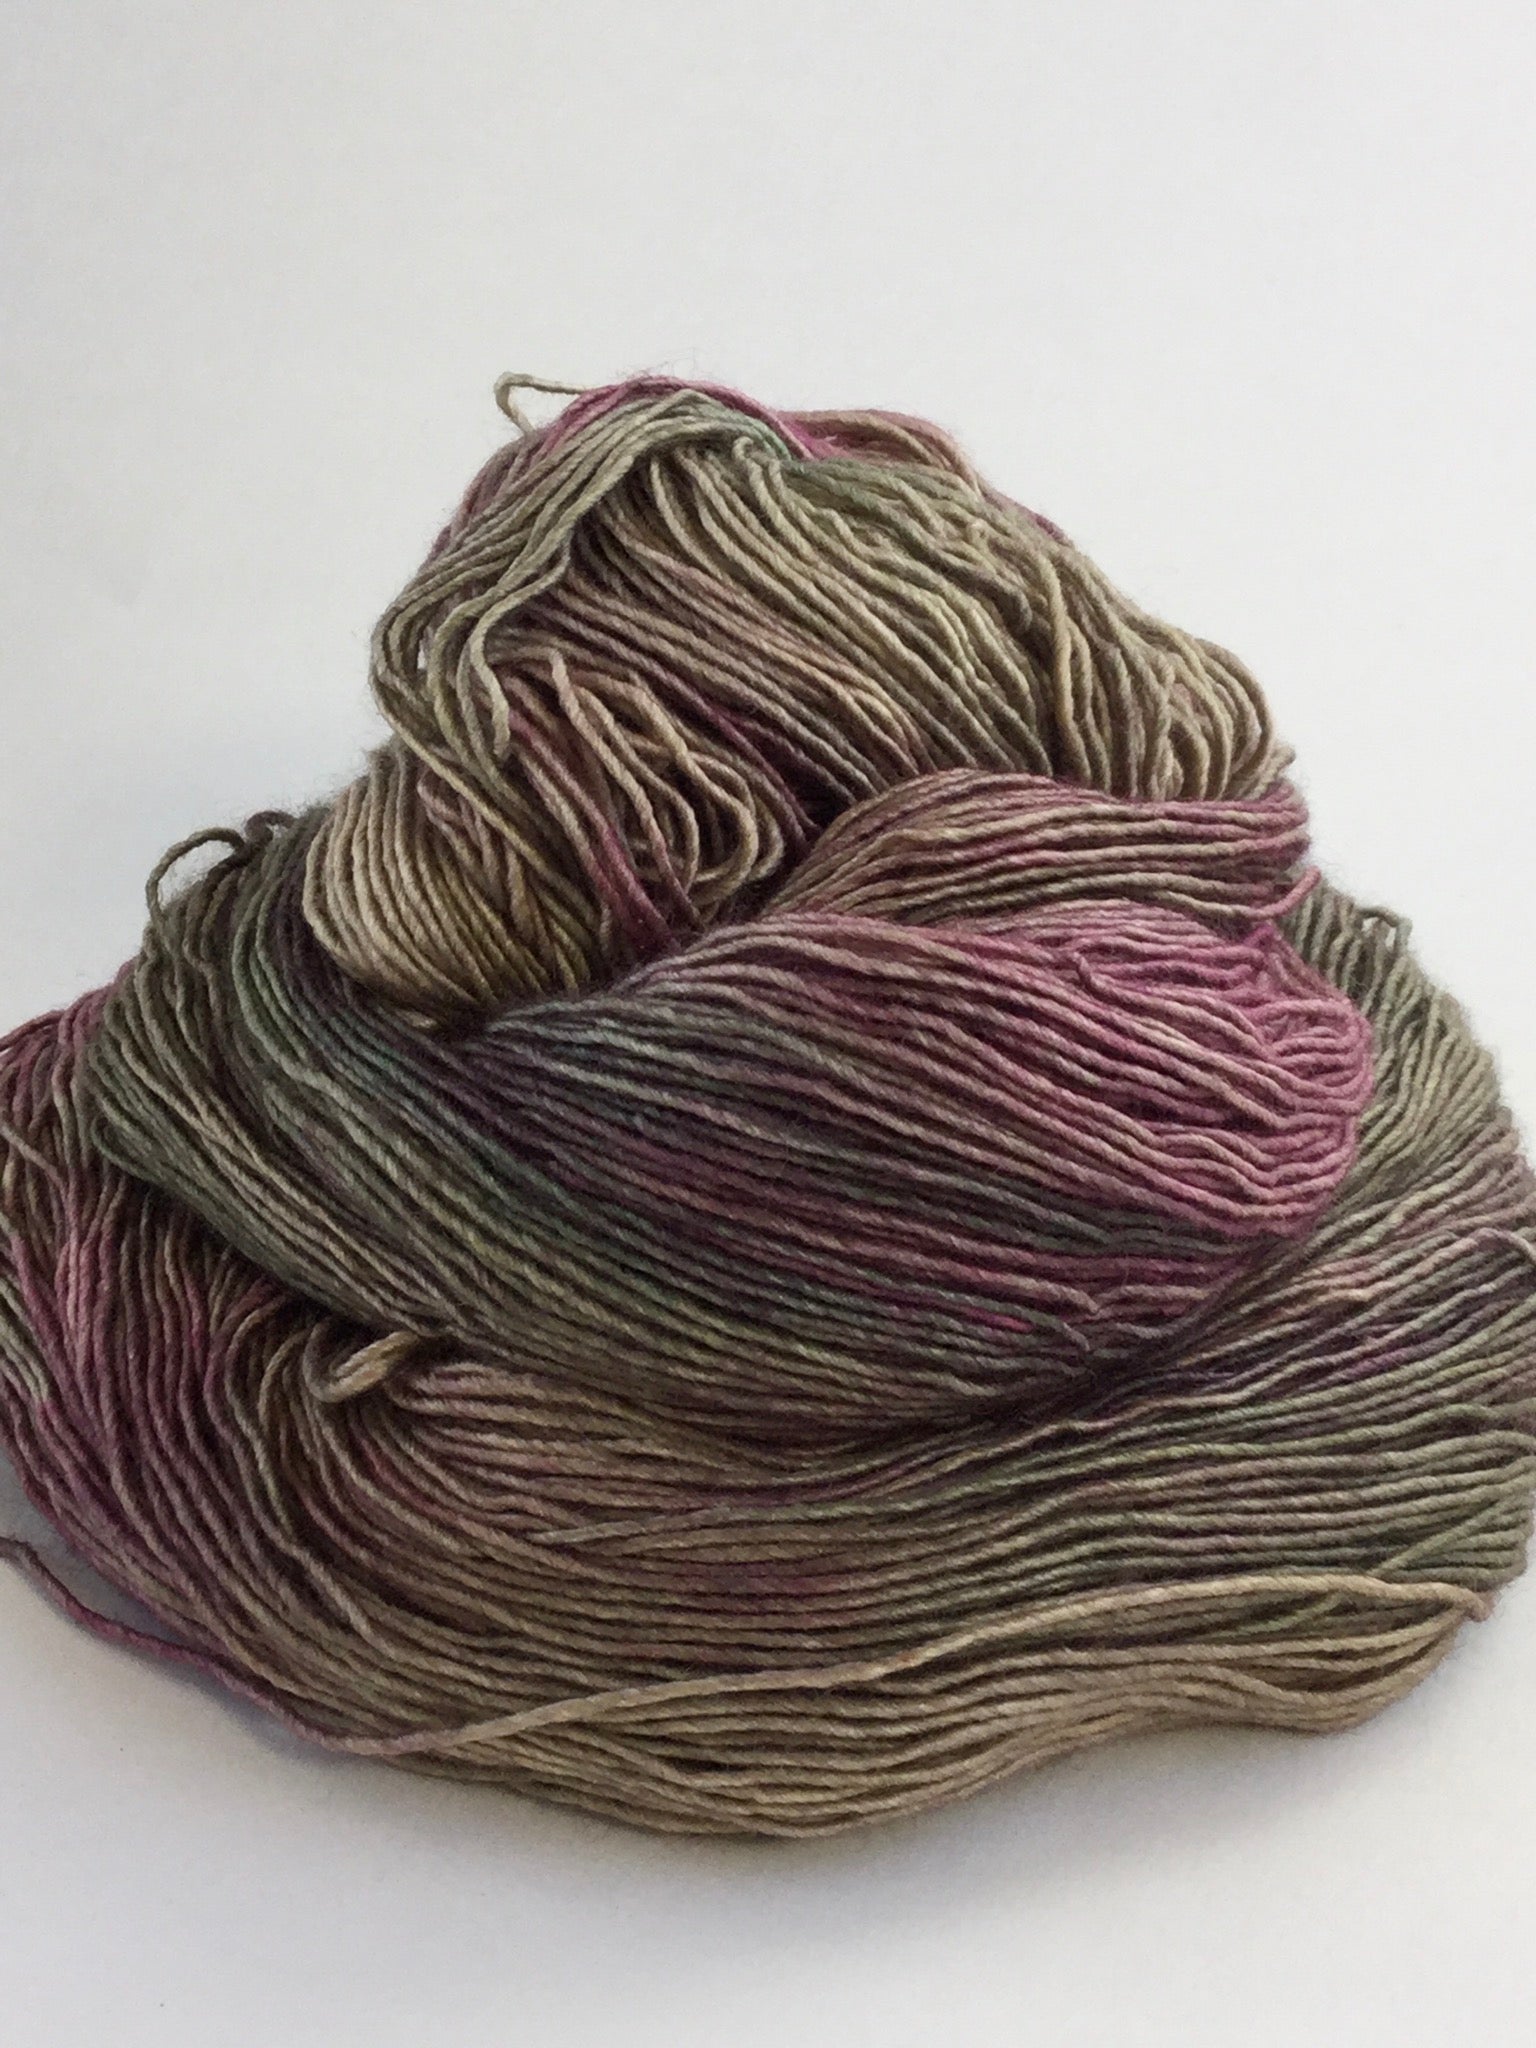 Of the Earth - River Silk and Merino from Tributary Yarns